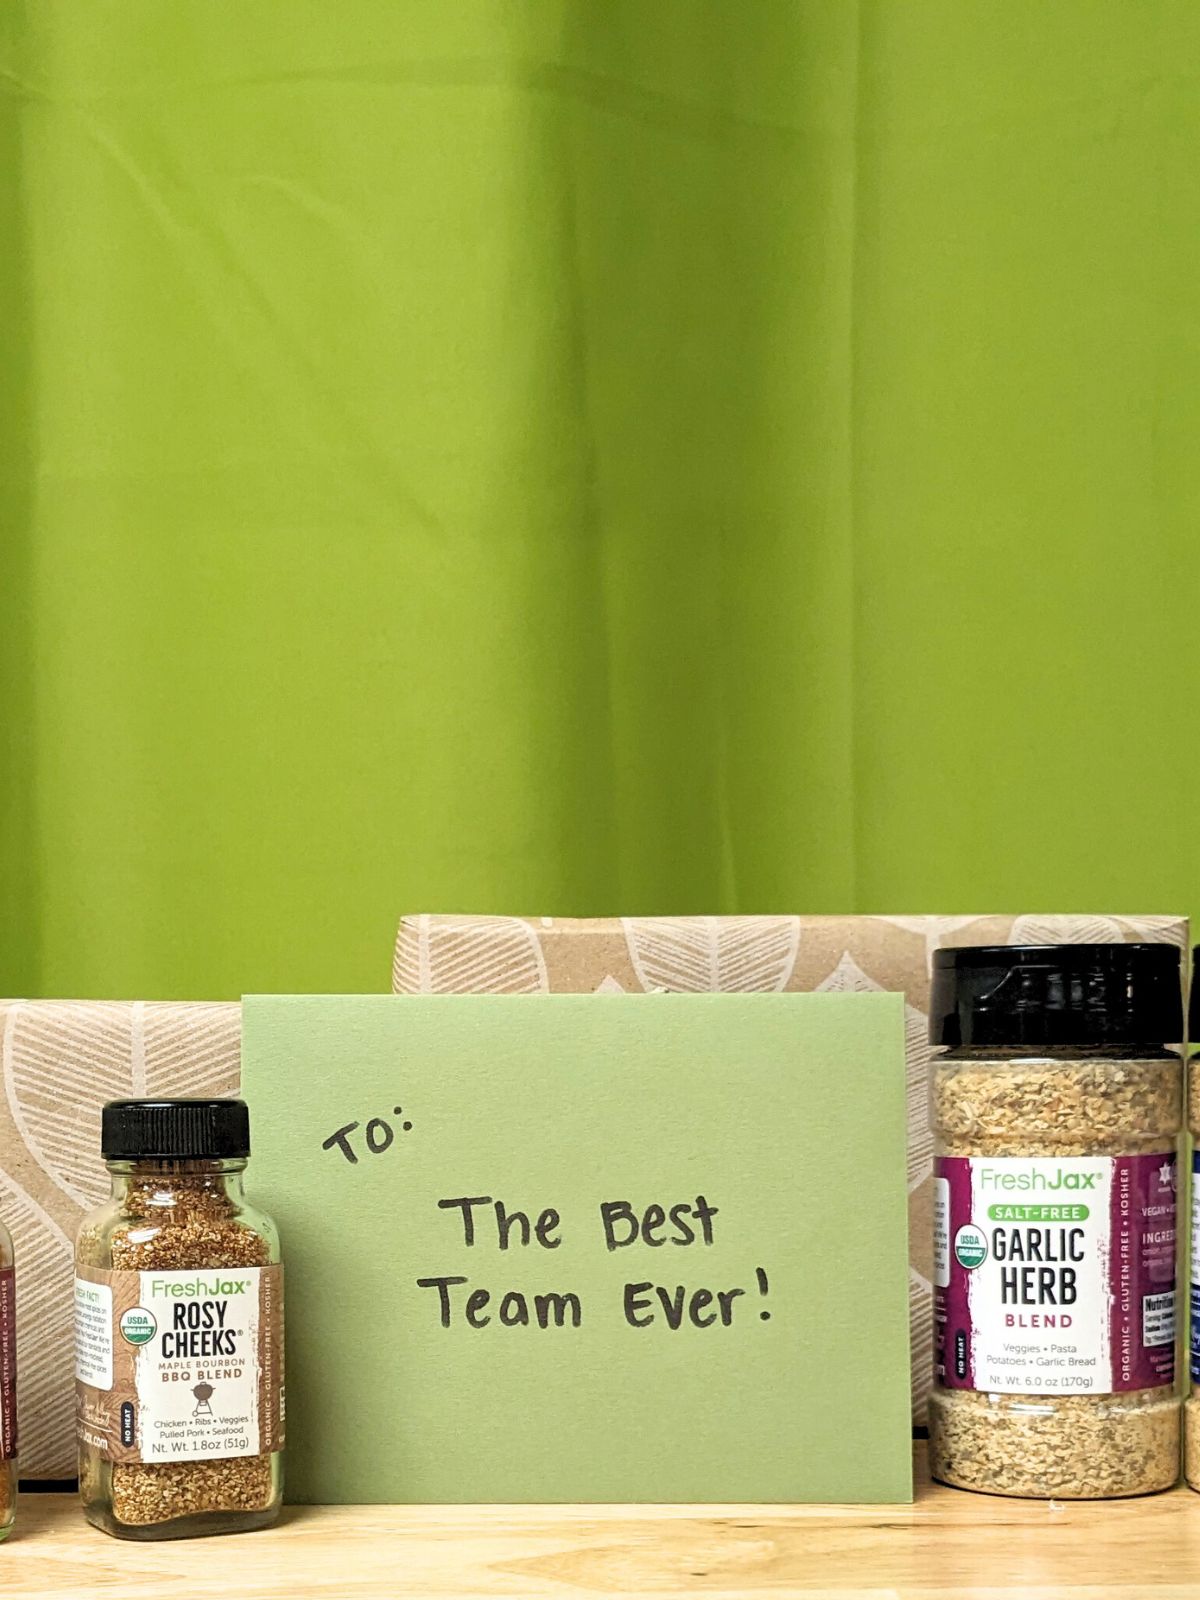 A Spice Gift set for an employee on a table